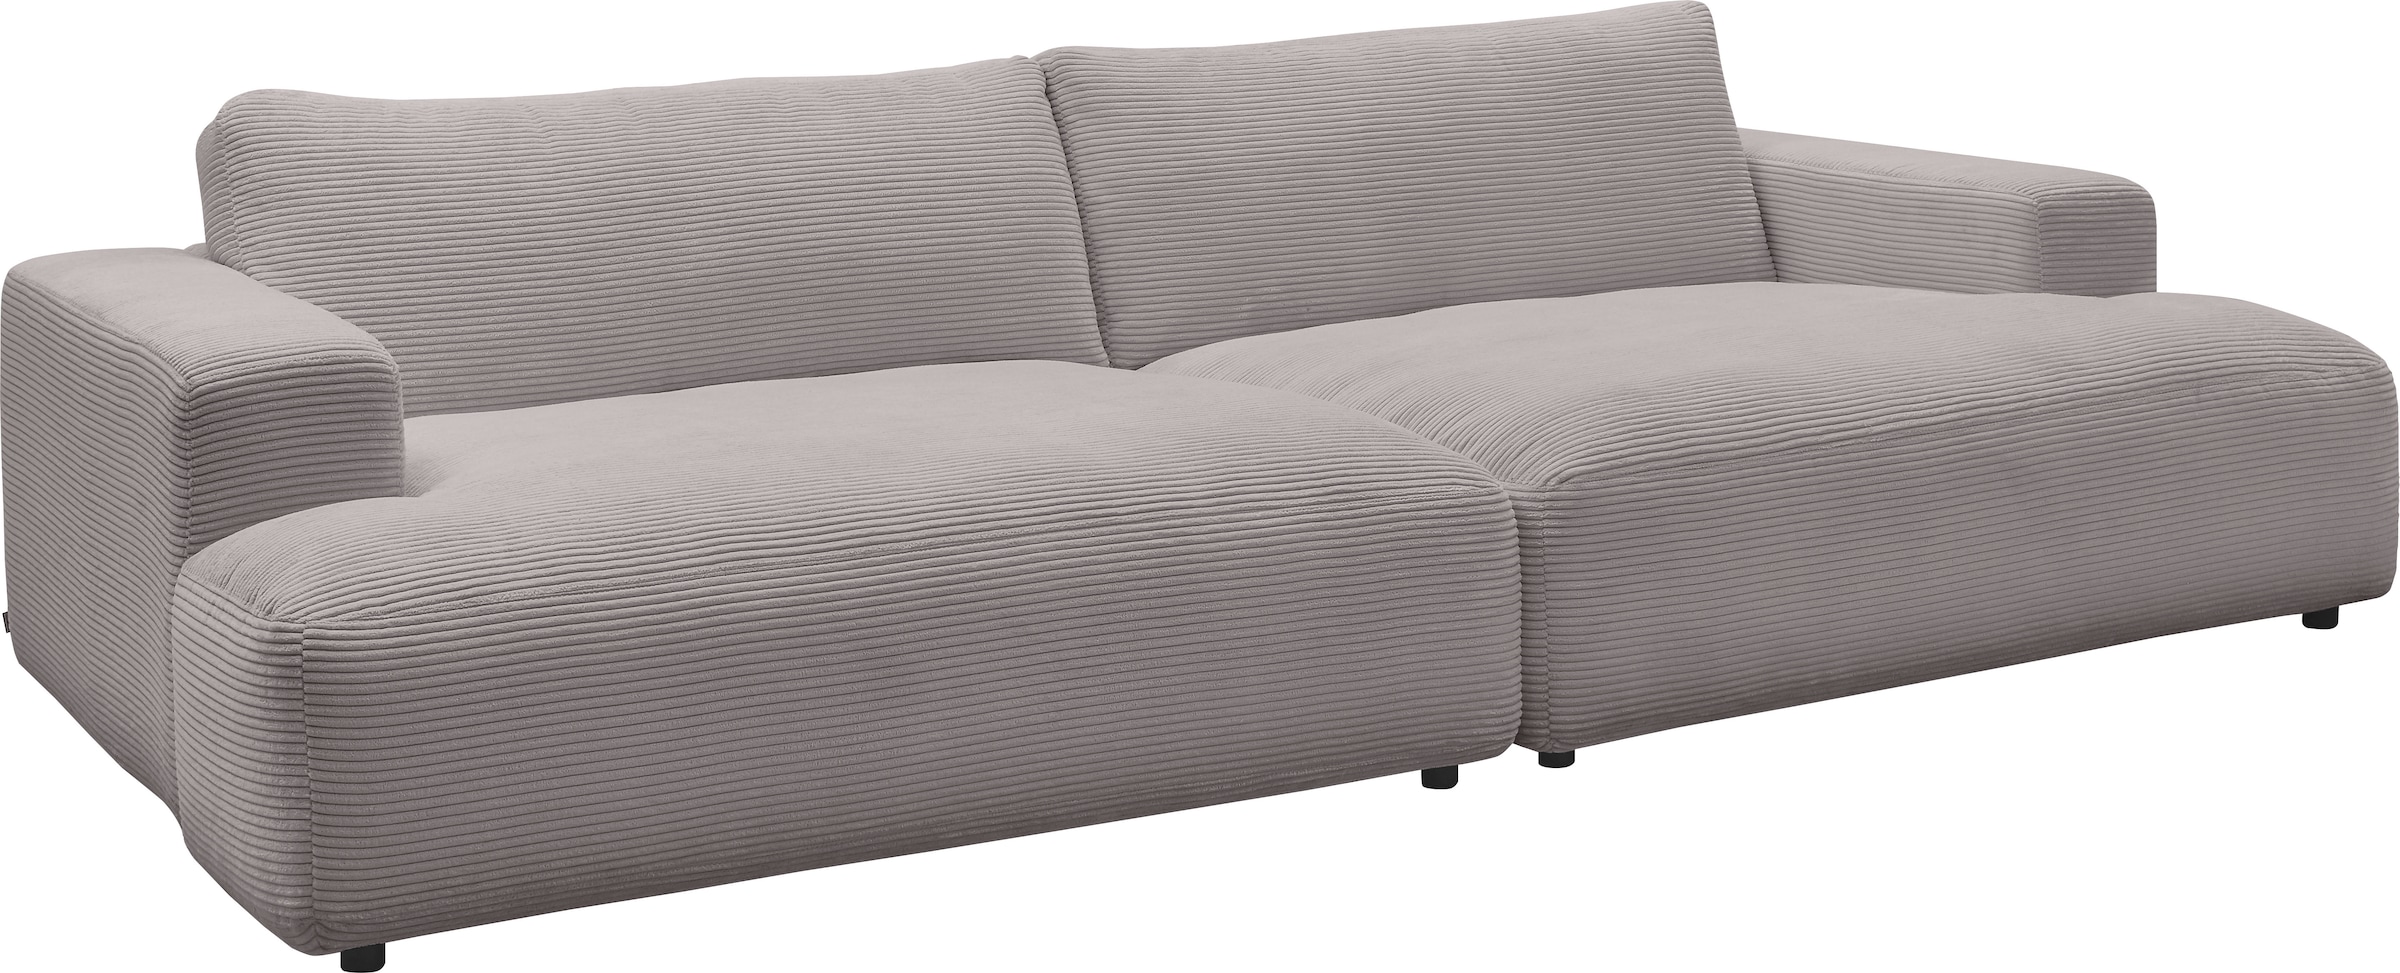 kaufen Musterring Breite GALLERY by Cord-Bezug, branded 292 cm Loungesofa bequem »Lucia«, M